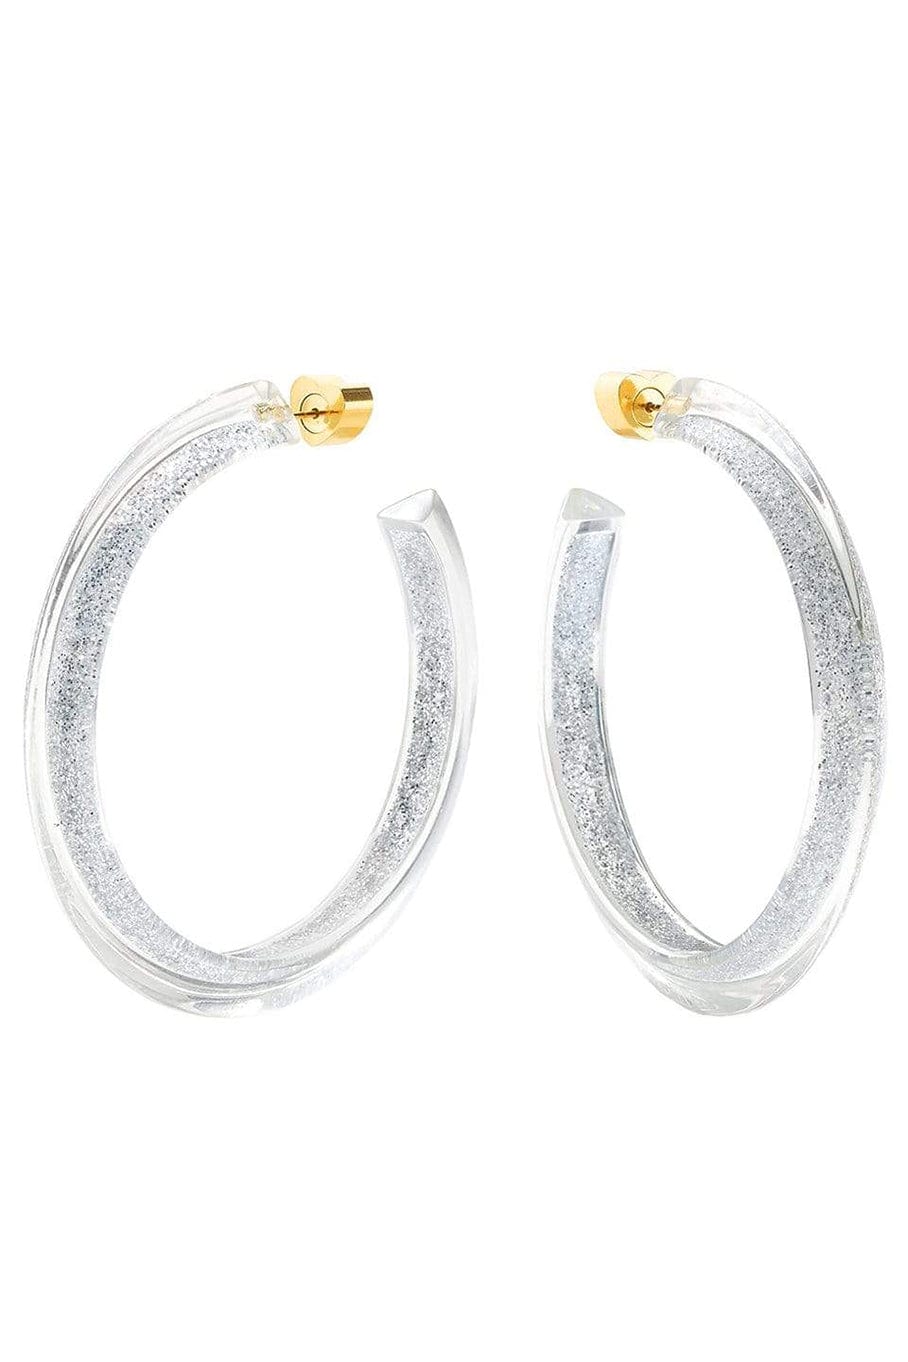 ALISON LOU-Medium Silver Glitter Jelly Hoops-YELLOW GOLD